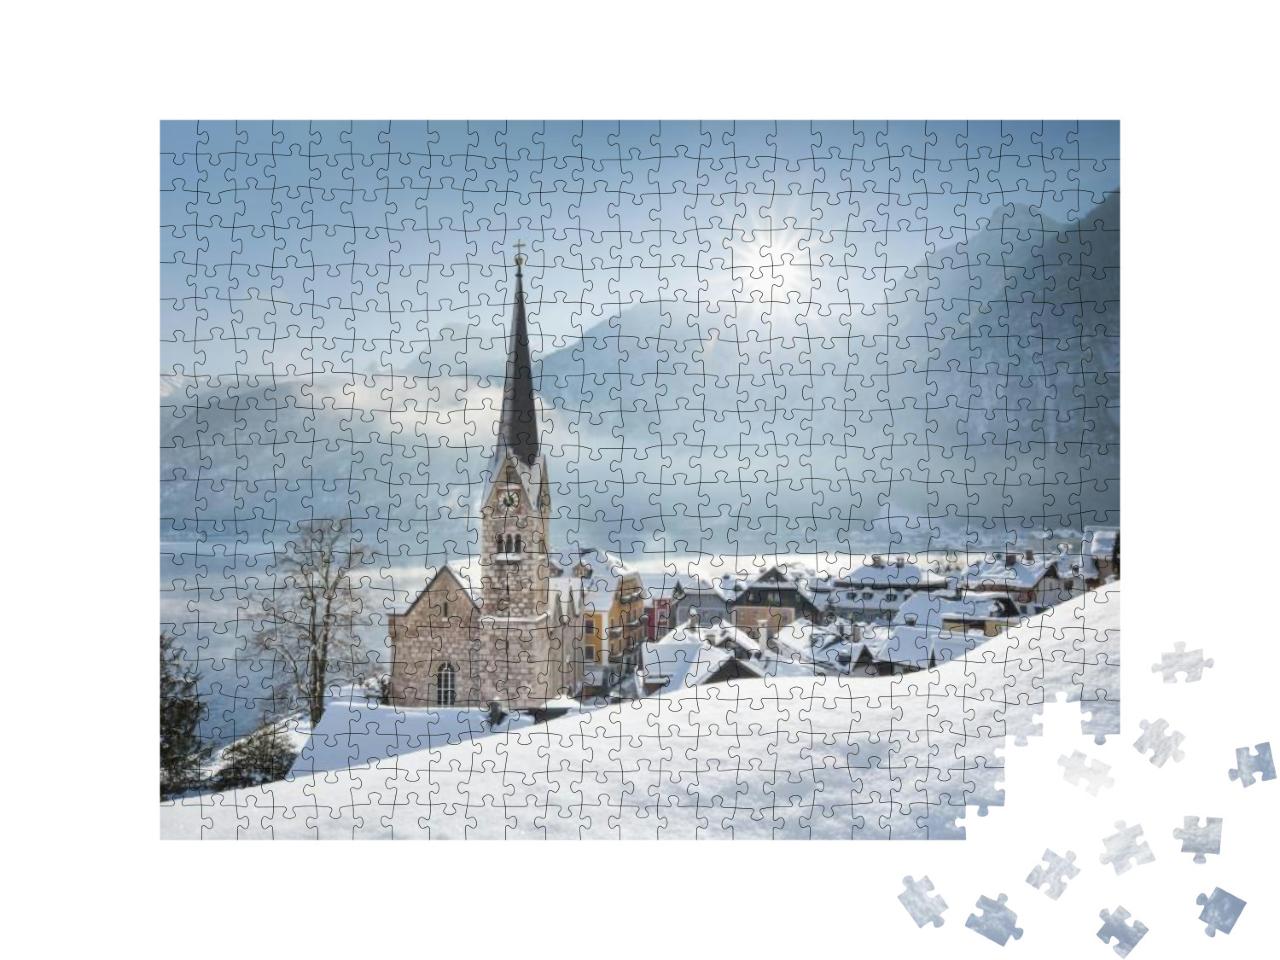 Panoramic View of Famous Hallstatt Lakeside Town During W... Jigsaw Puzzle with 500 pieces